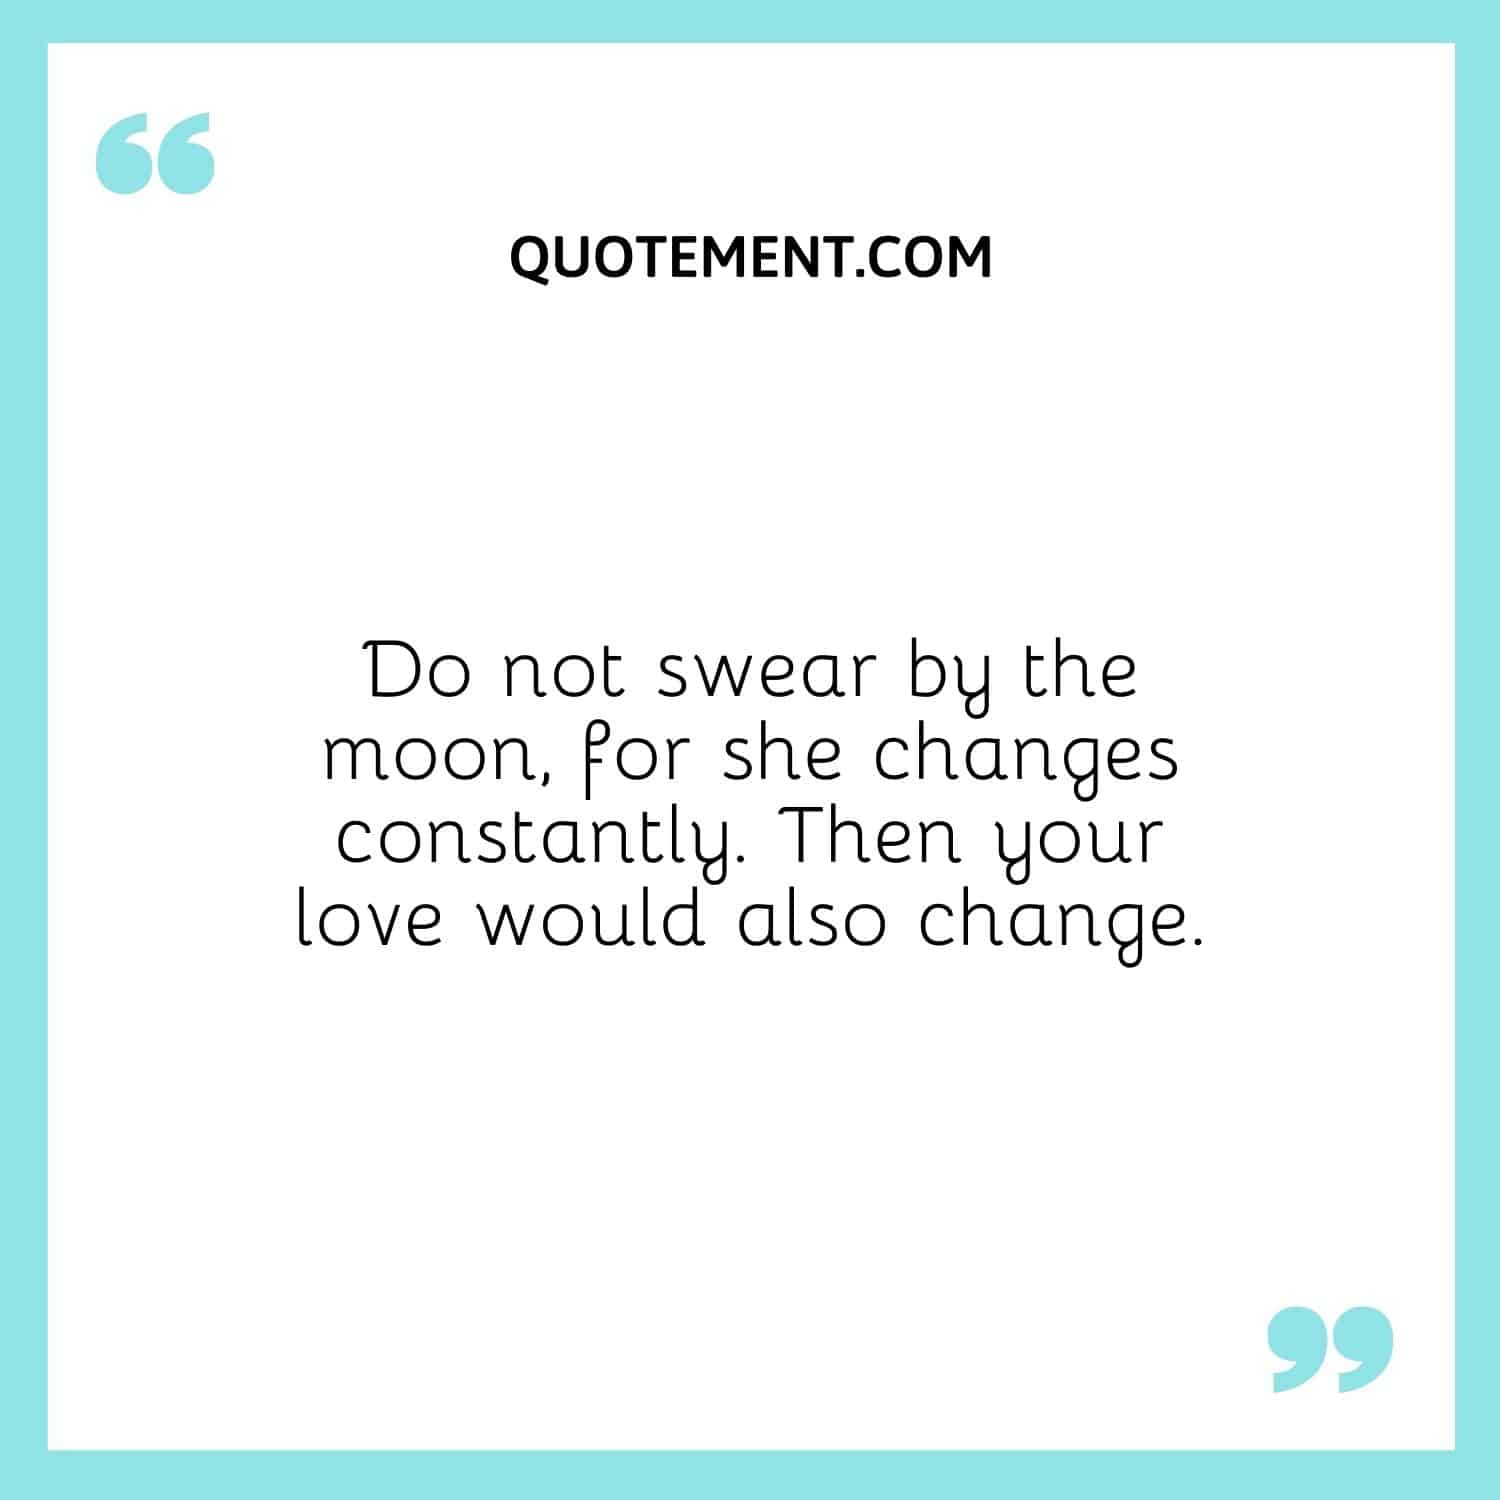 Do not swear by the moon, for she changes constantly. Then your love would also change.